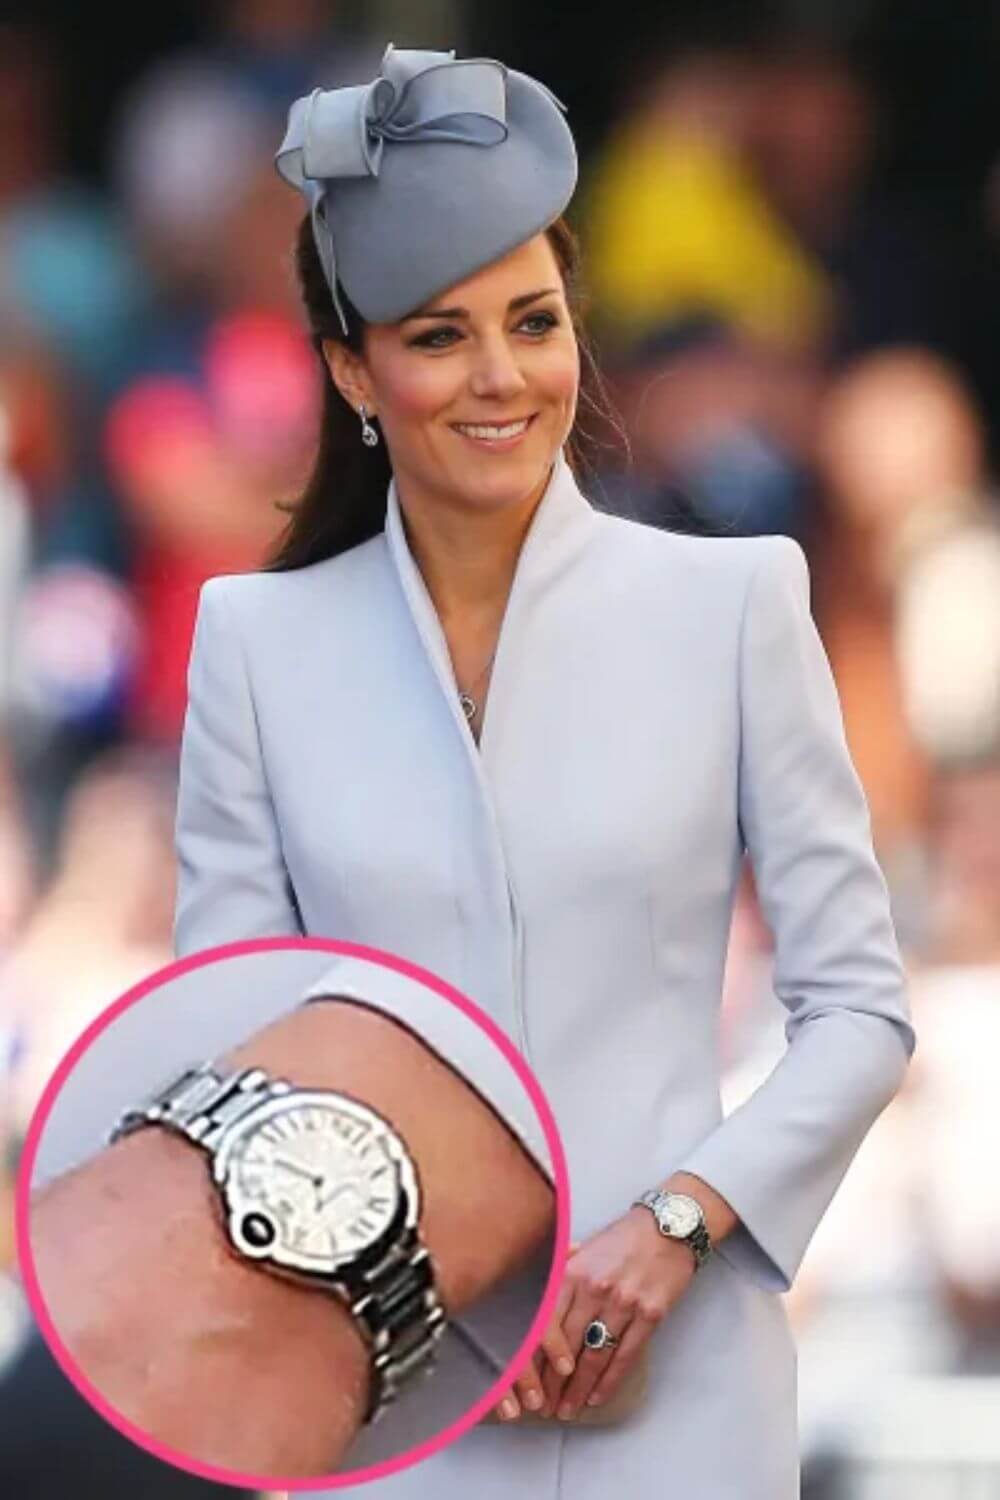 Kate Middleton wearing wrist watch at a royal event